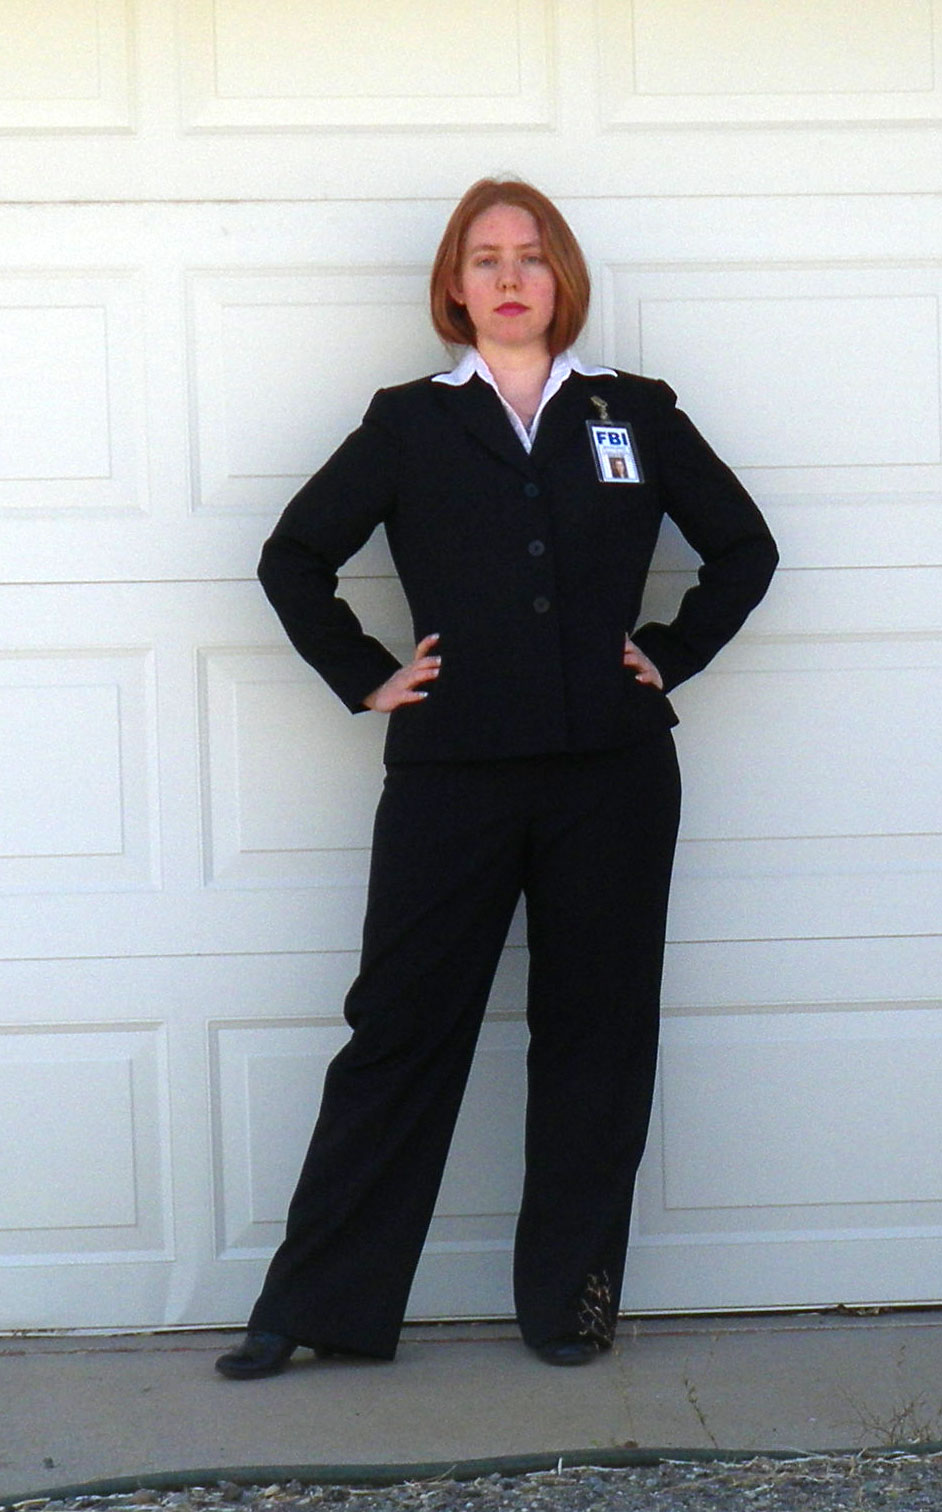 I have dressed as Scully for Halloween for several years and I decided to f...